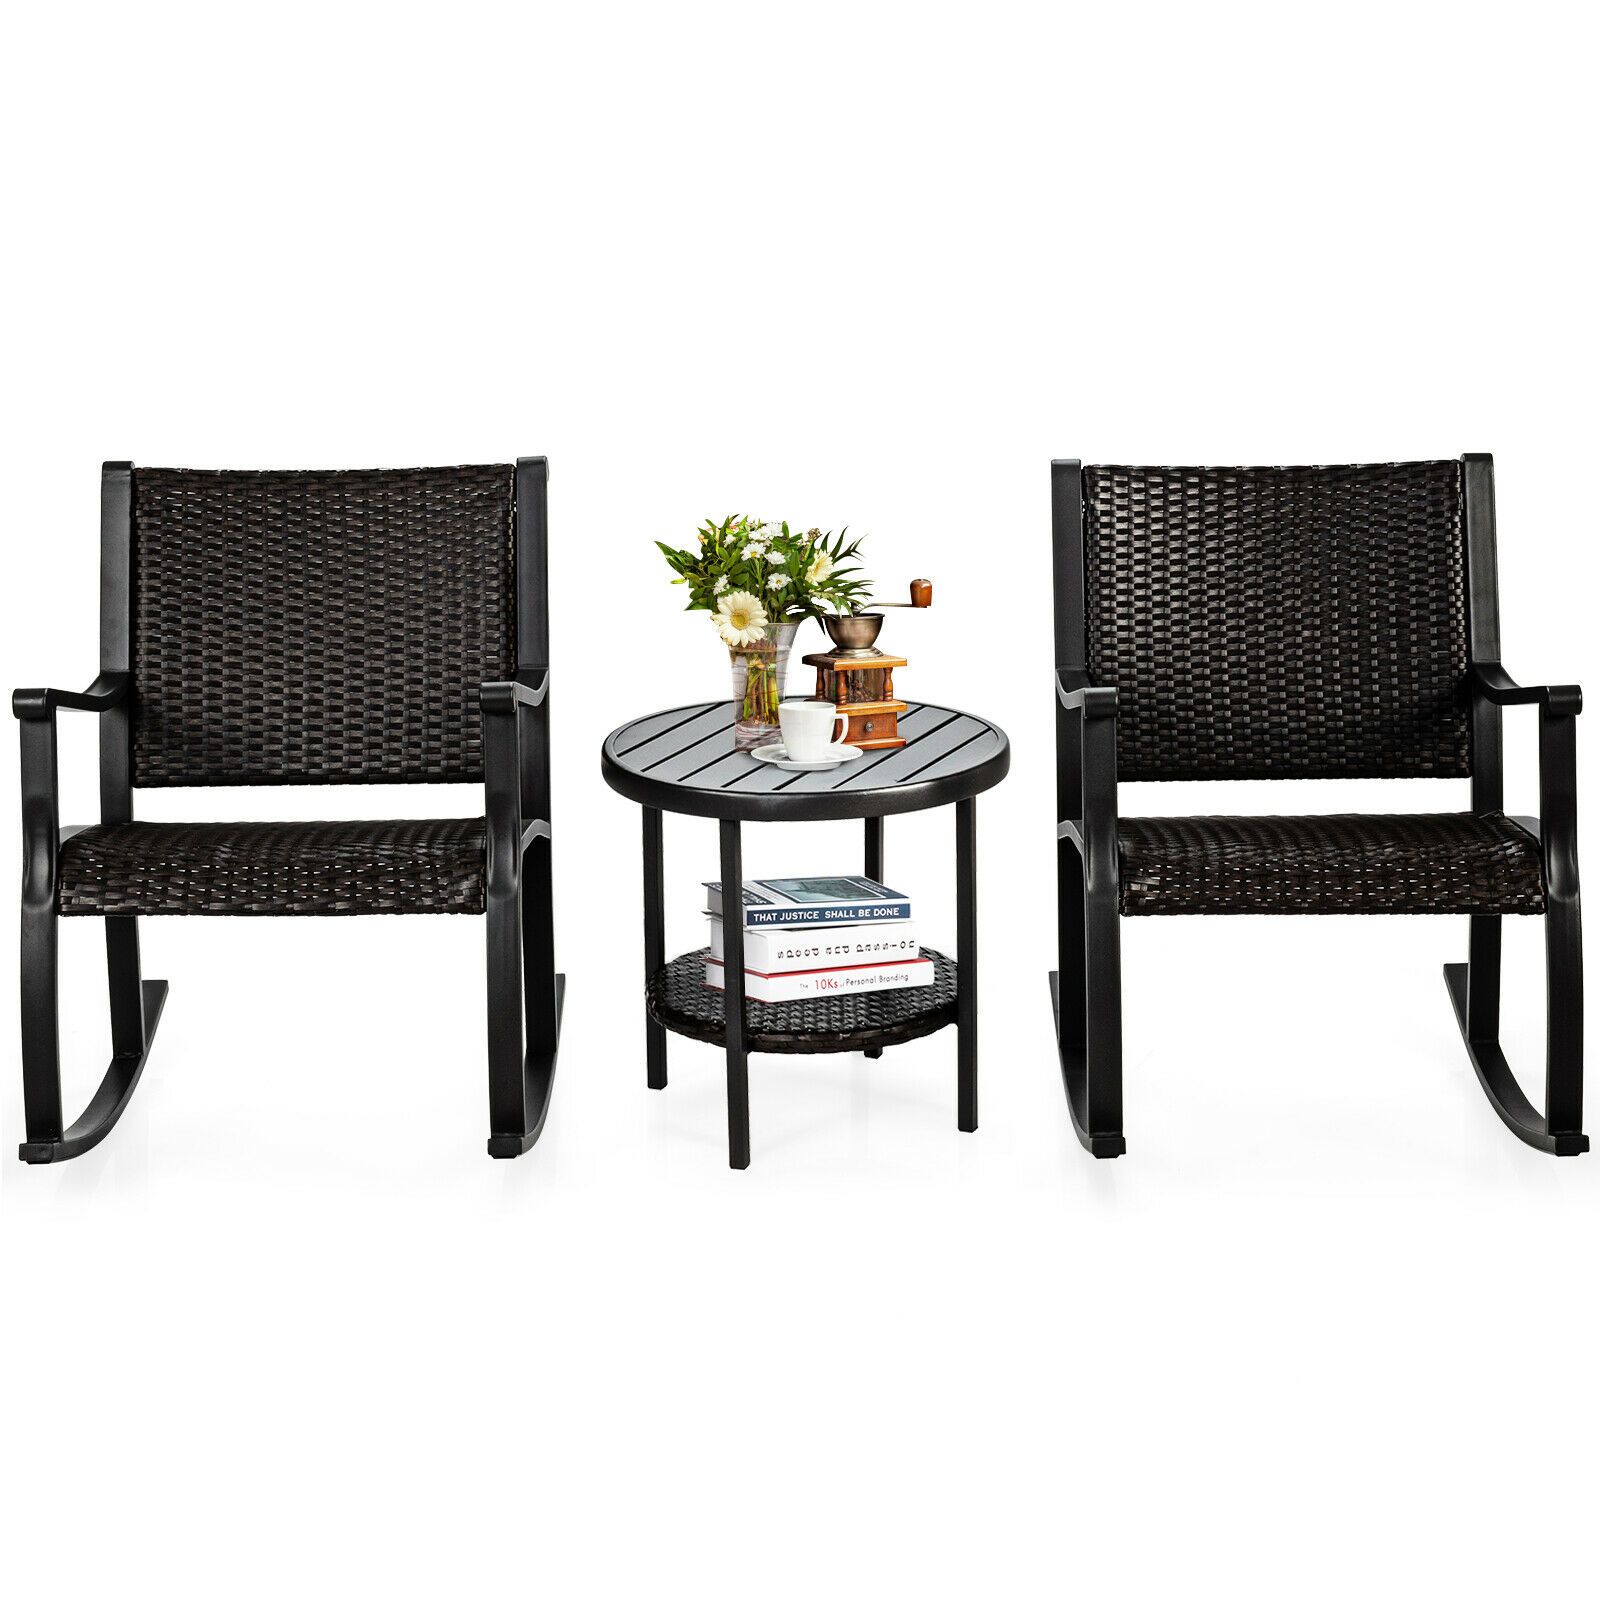 3 Piece Rocking Table Chairs Set with Coffee Table for Poolside